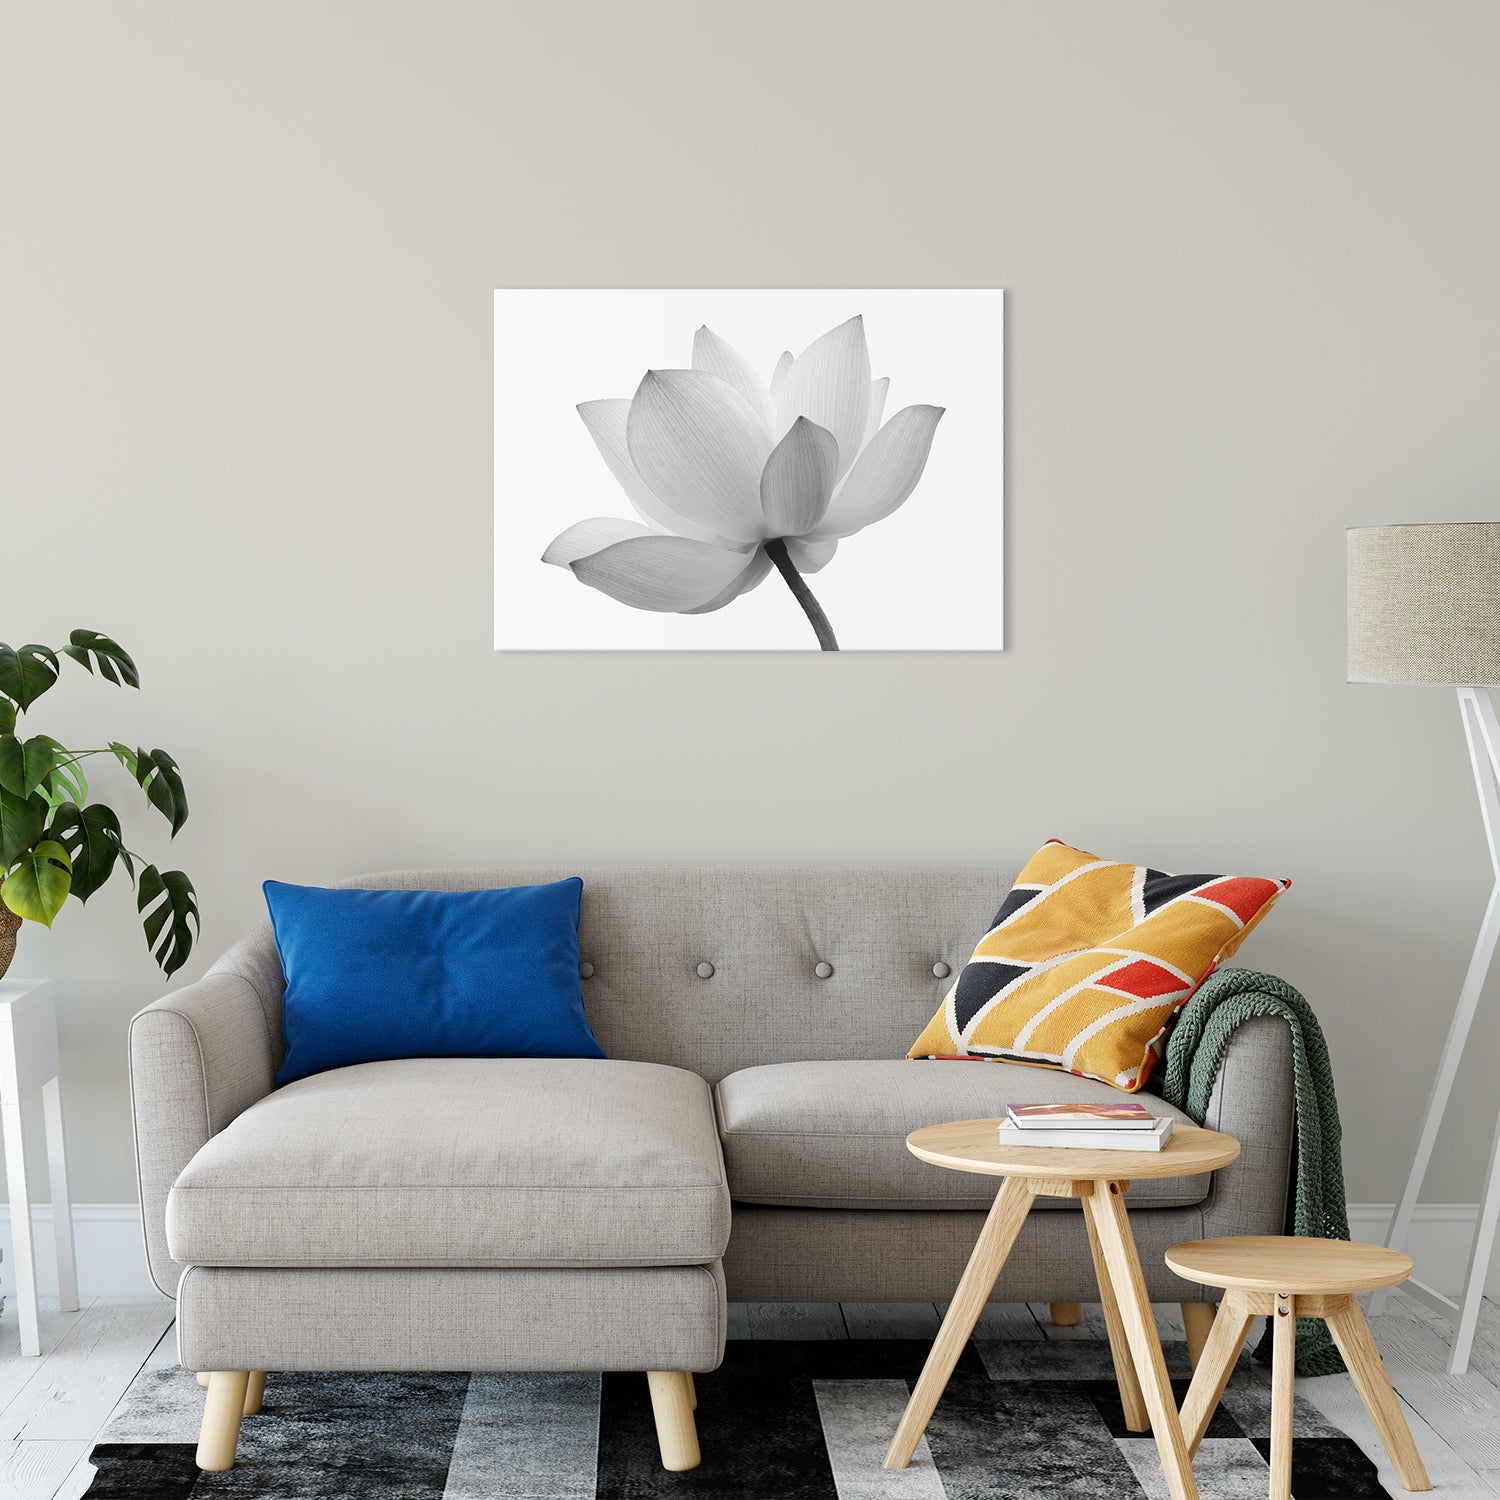 Lotus Flower Black and White Floral Nature Photo Fine Art Canvas Print 24" x 36" - PIPAFINEART